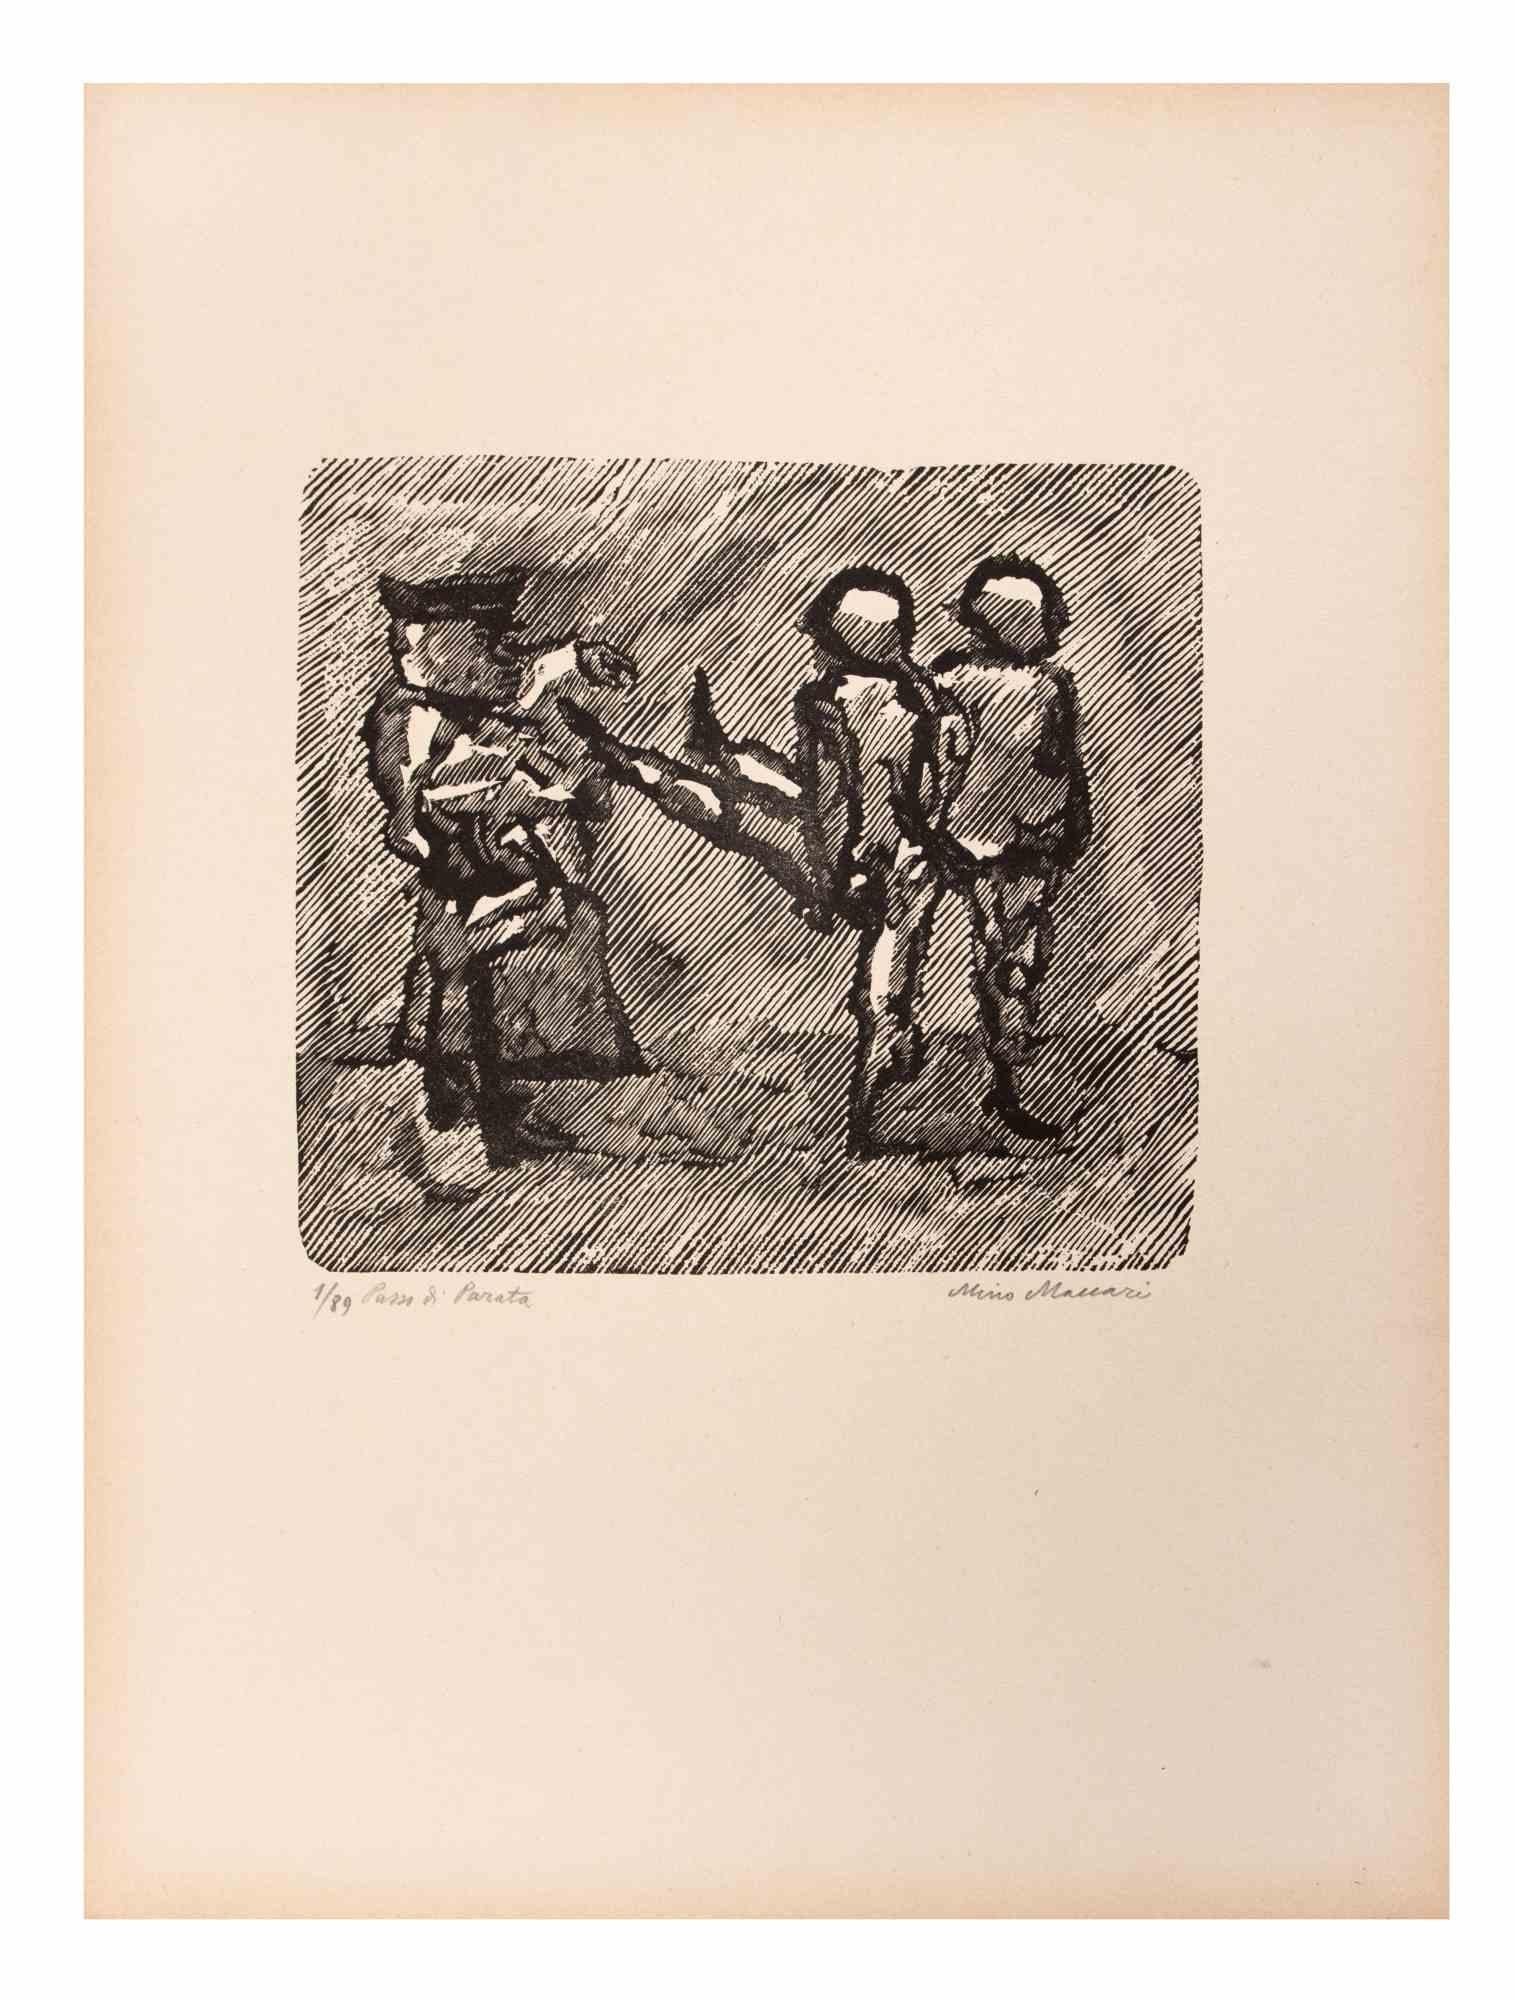 Passi di Parata is an Artwork realized by Mino Maccari  (1924-1989) in the Mid-20th Century.

Woodcut on paper. Hand-signed on the lower right corner. Numbered 1/89 specimens and titled on the left margin.

Good conditions.

Mino Maccari (Siena,